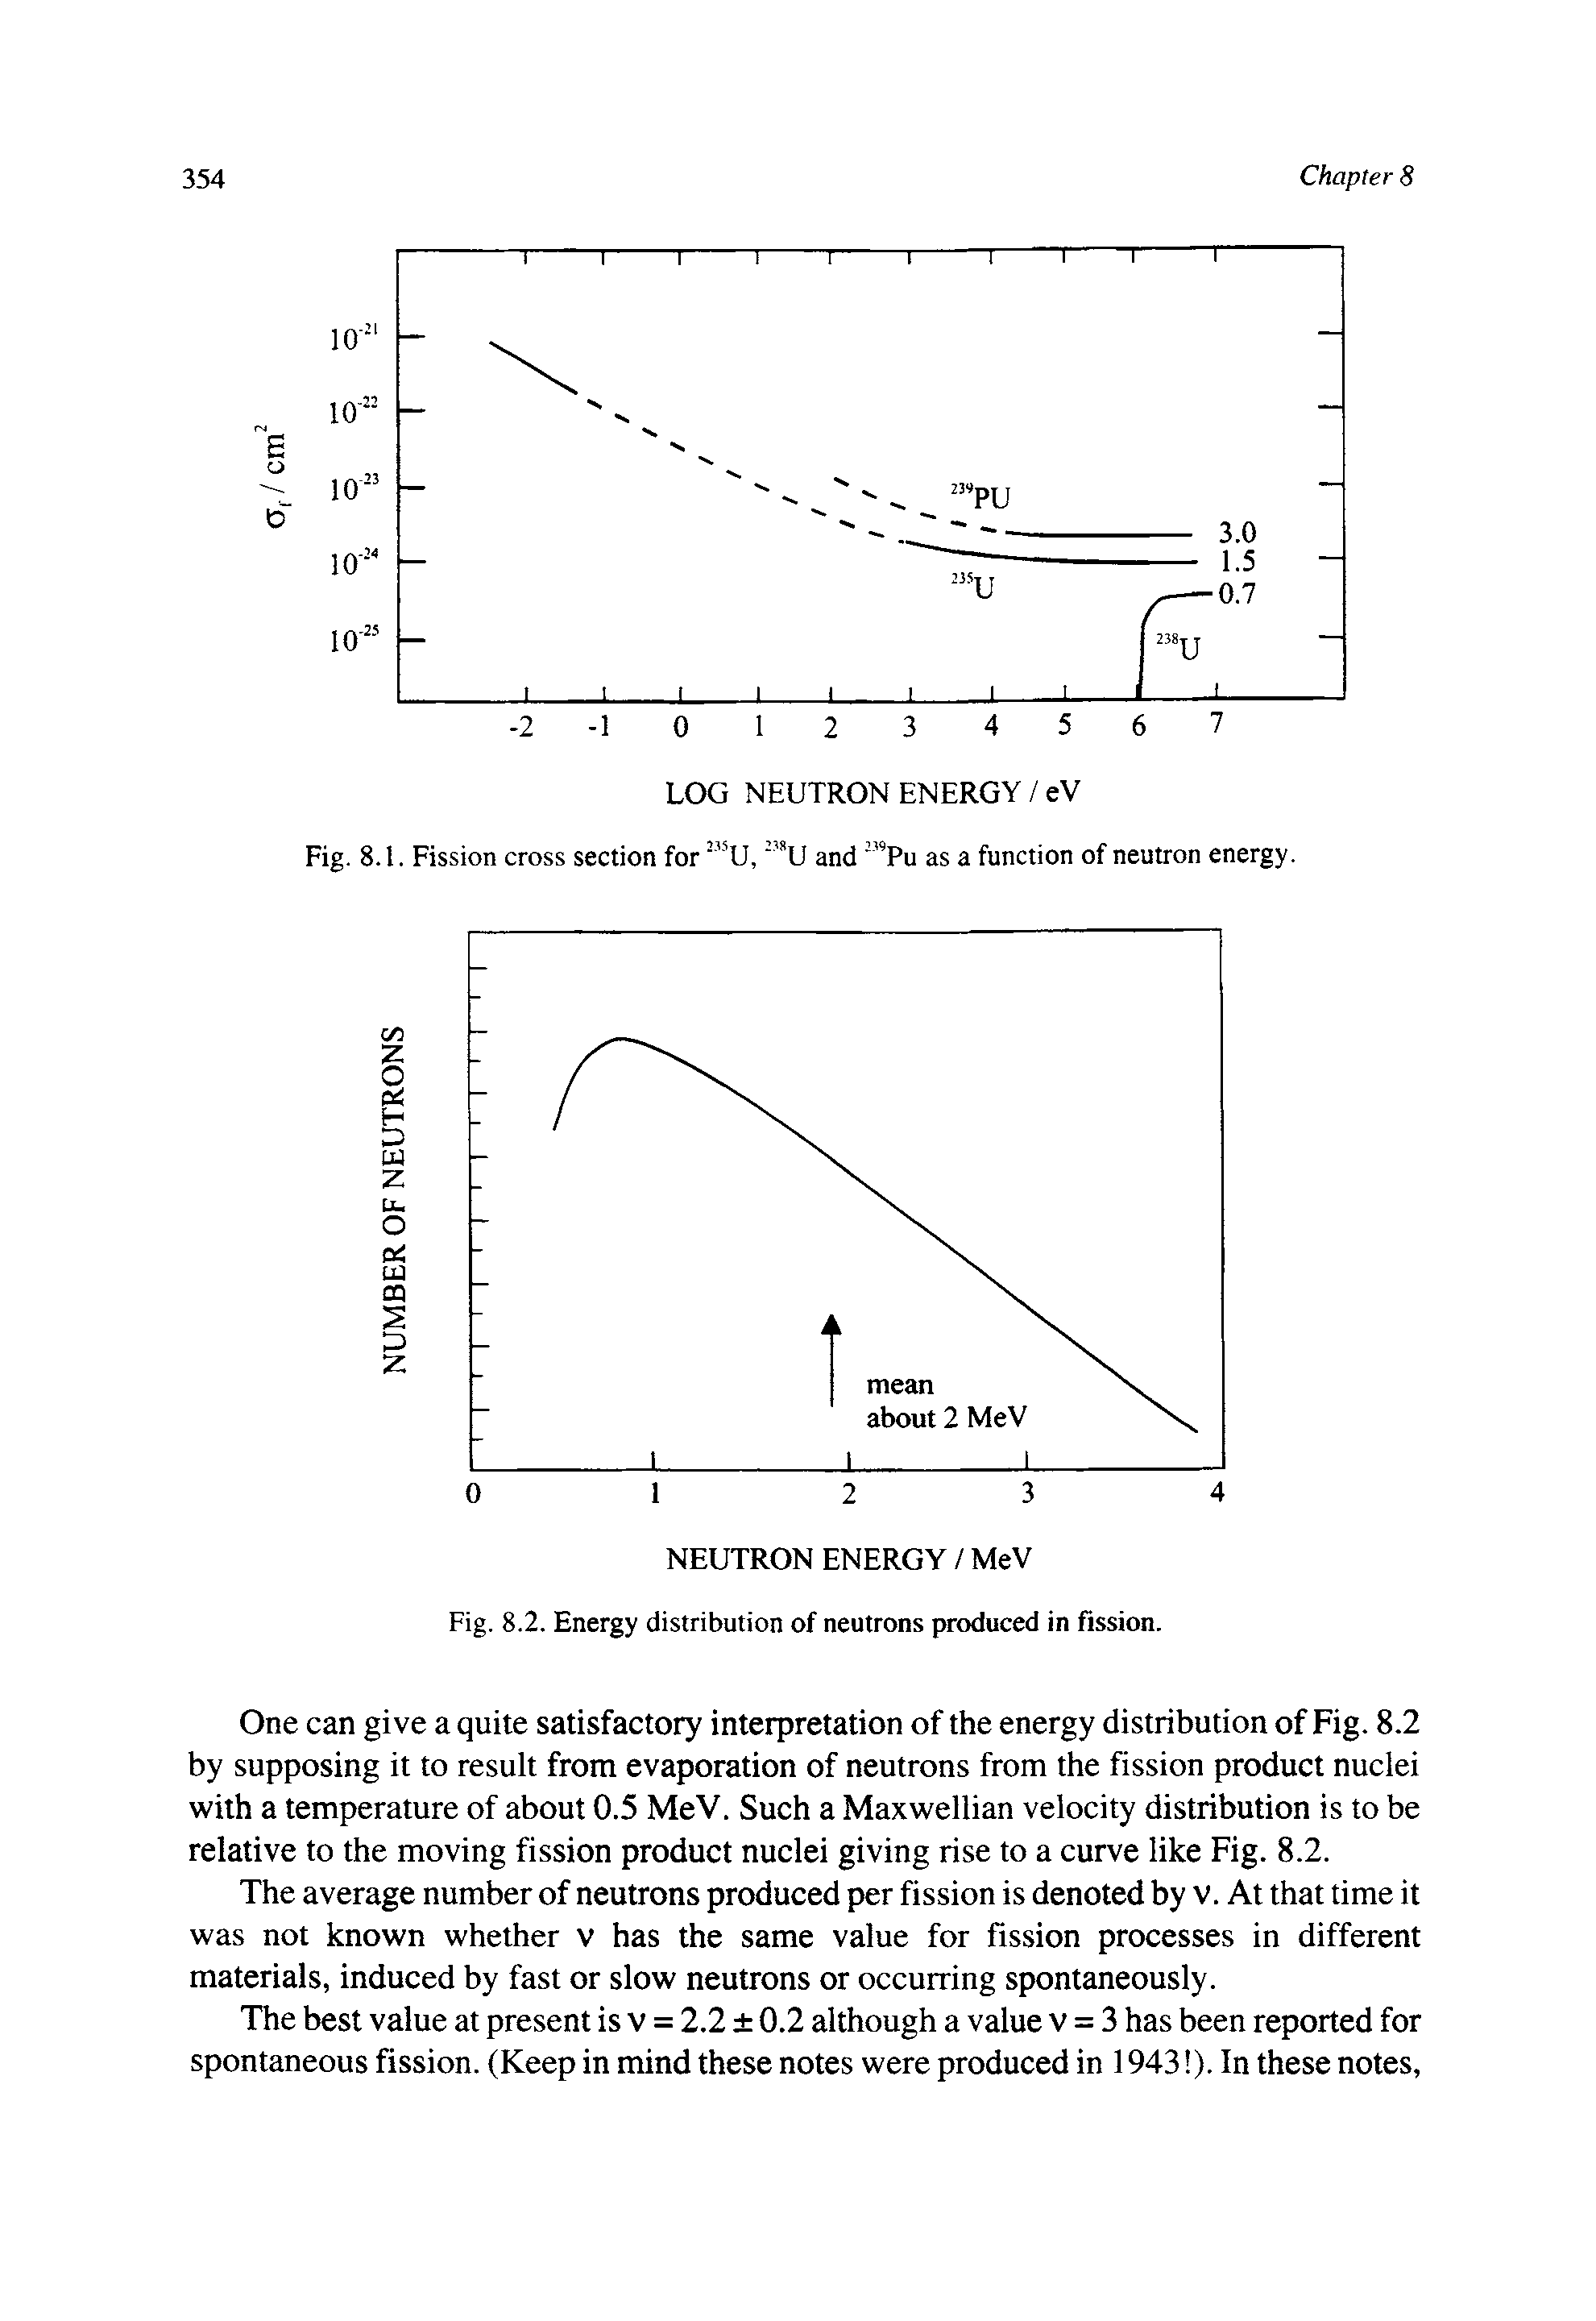 Fig. 8.1. Fission cross section for U, U and Pu as a function of neutron energy.